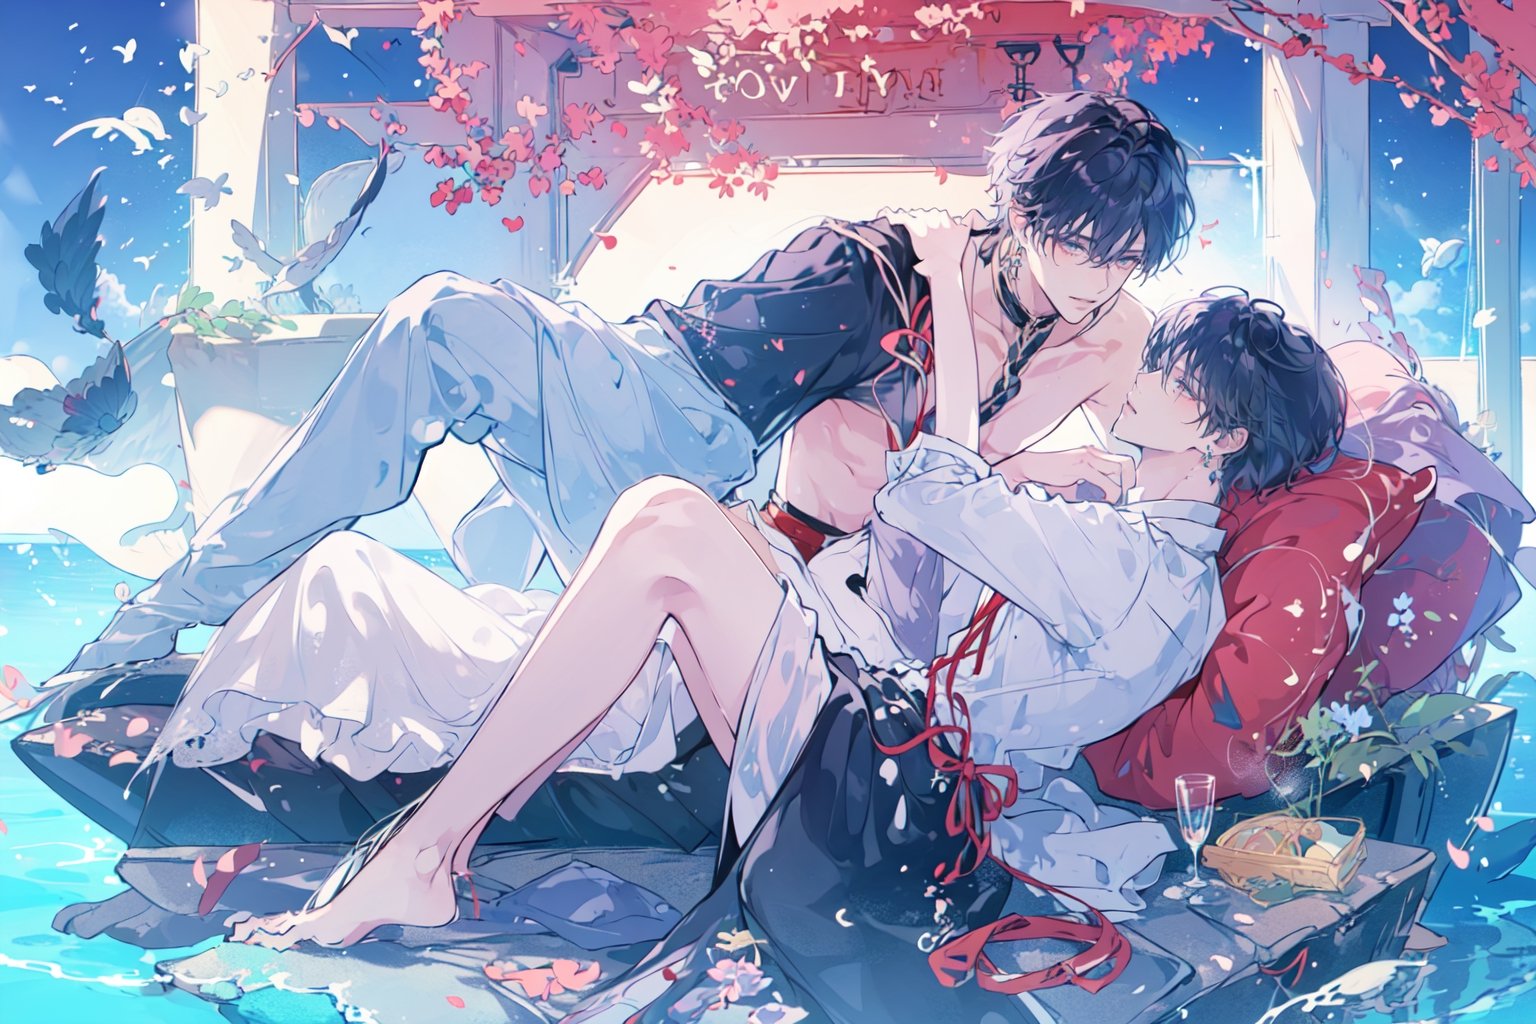 (((2boys flirting))), top quality, best quality, masterpiece, tiara, hair_tied, earrings, physical intimacy, perfect light, (yaoi), (male_only), perfect body, perfect legs, diving_the_water_background, full body shot, full_length_portrait,